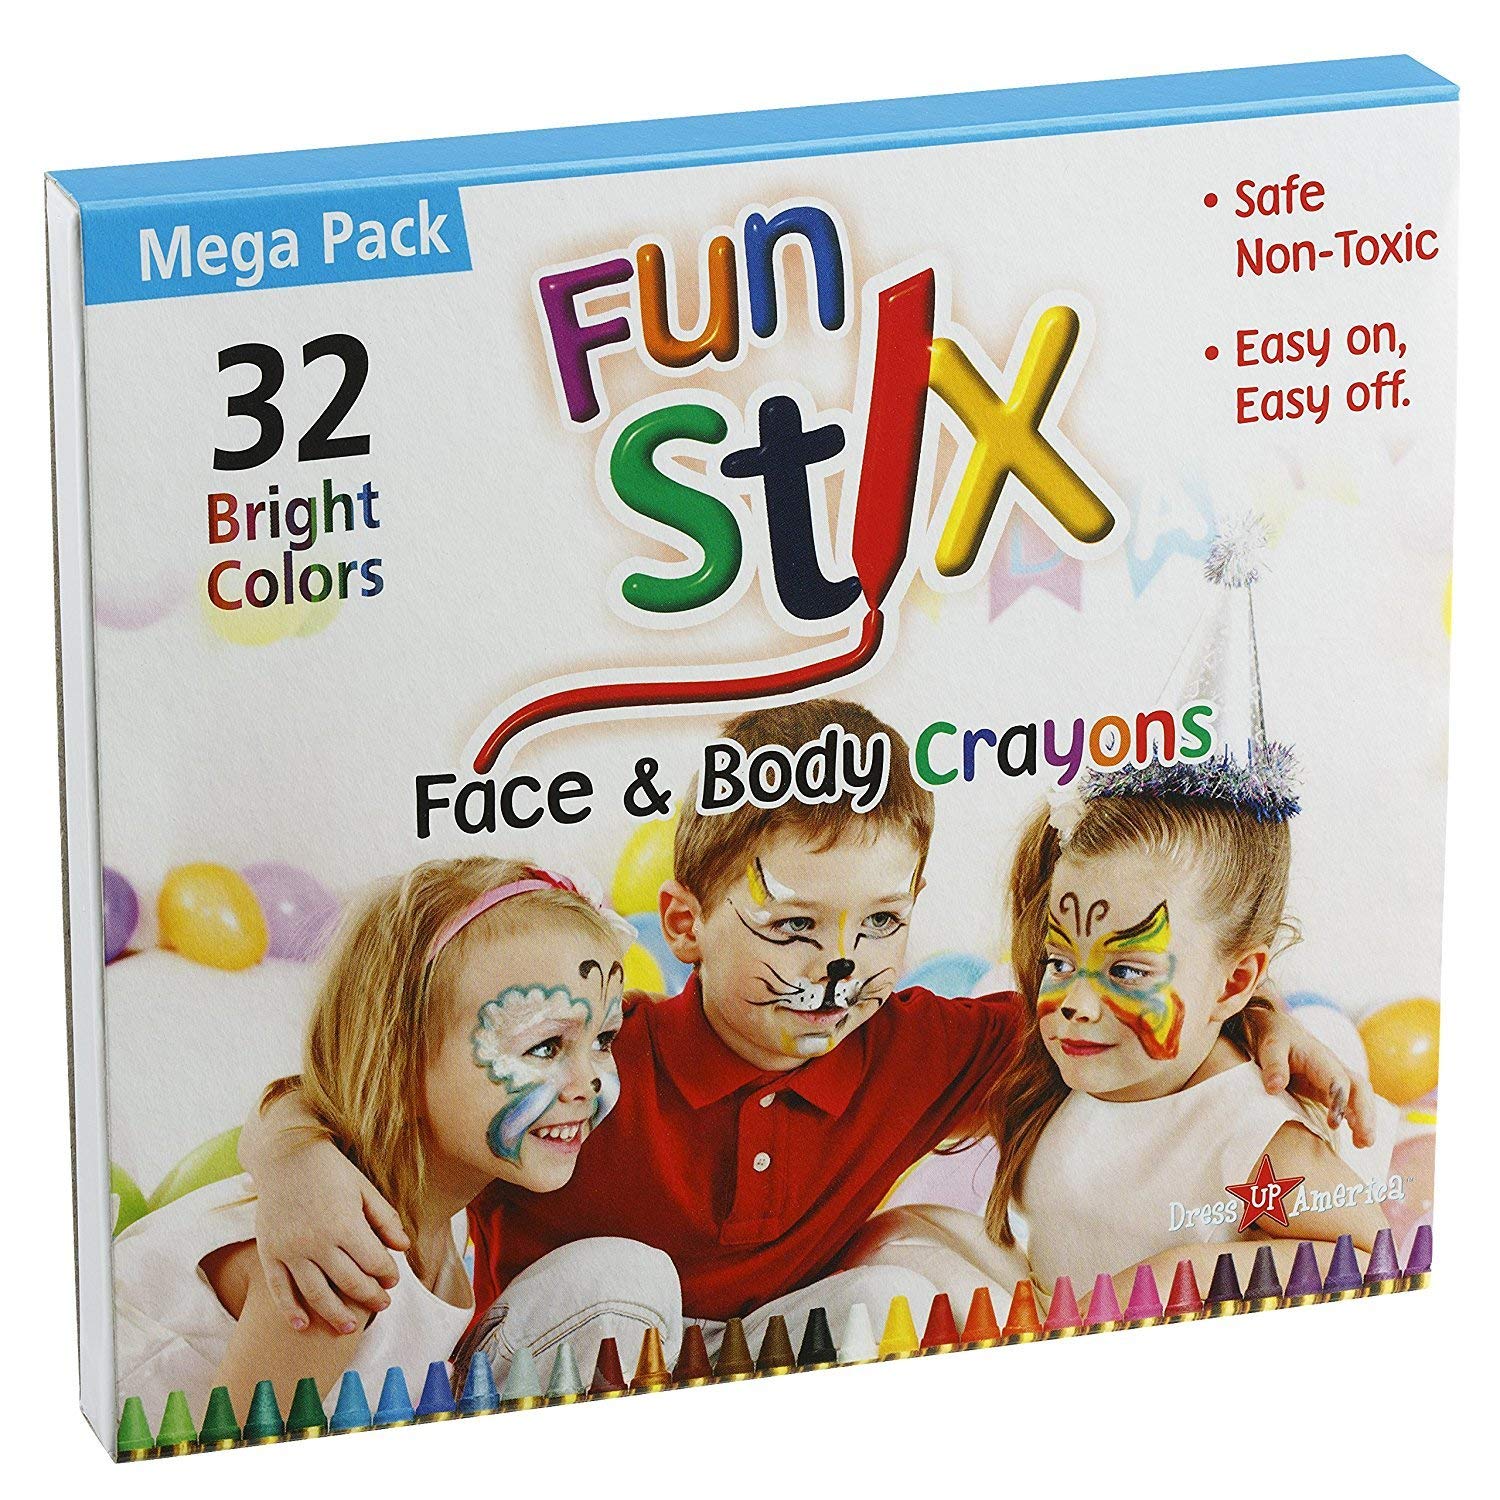 Dress-Up-America Face Paint Crayons - With Artbook & Easy To Follow Facepainting Designs -Safe Non-Toxic Face And Body Paint Made in Taiwan - Halloween Makeup Face Painting Kit for Kids & Adults